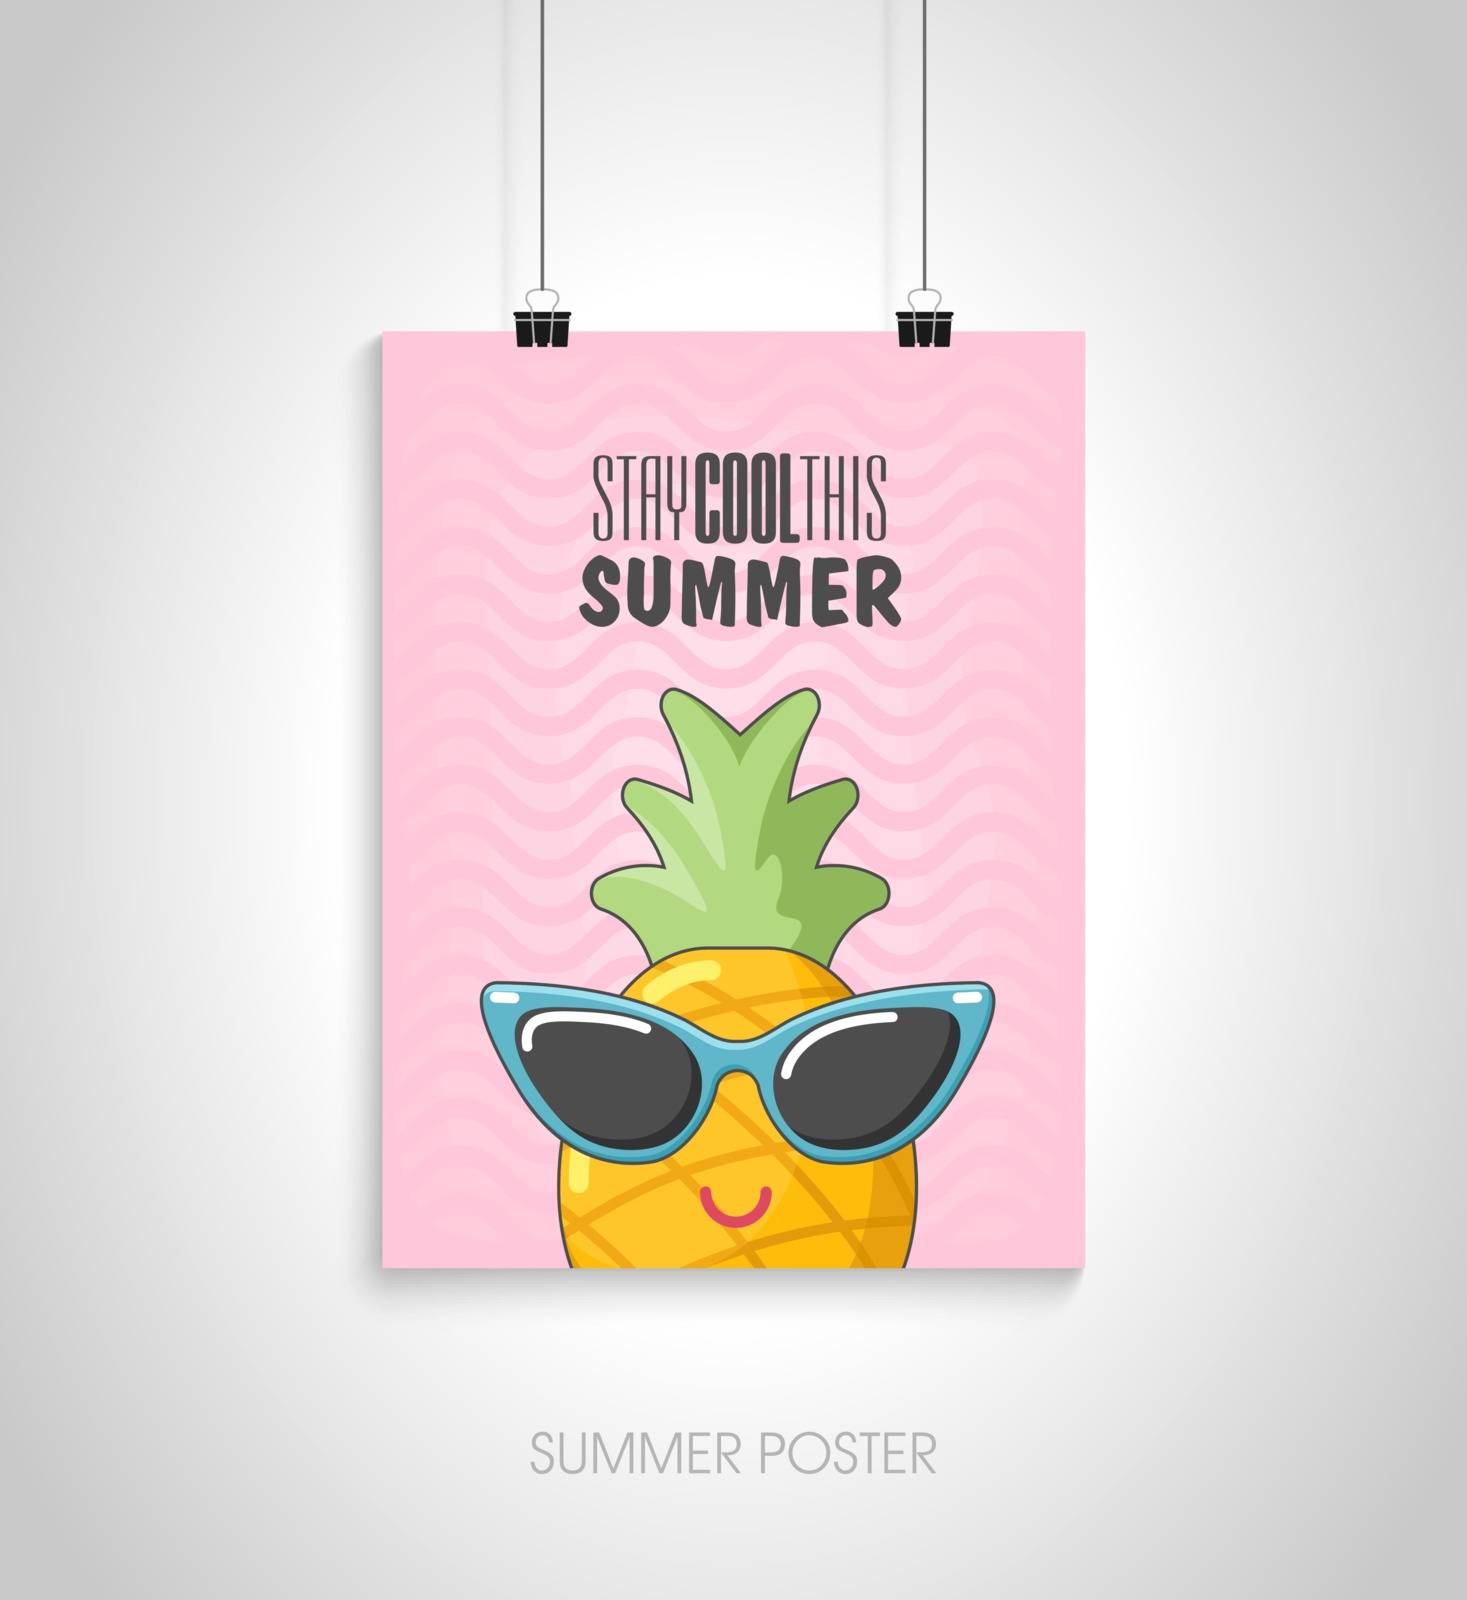 Summer poster card. Stay cool this summer by nosik